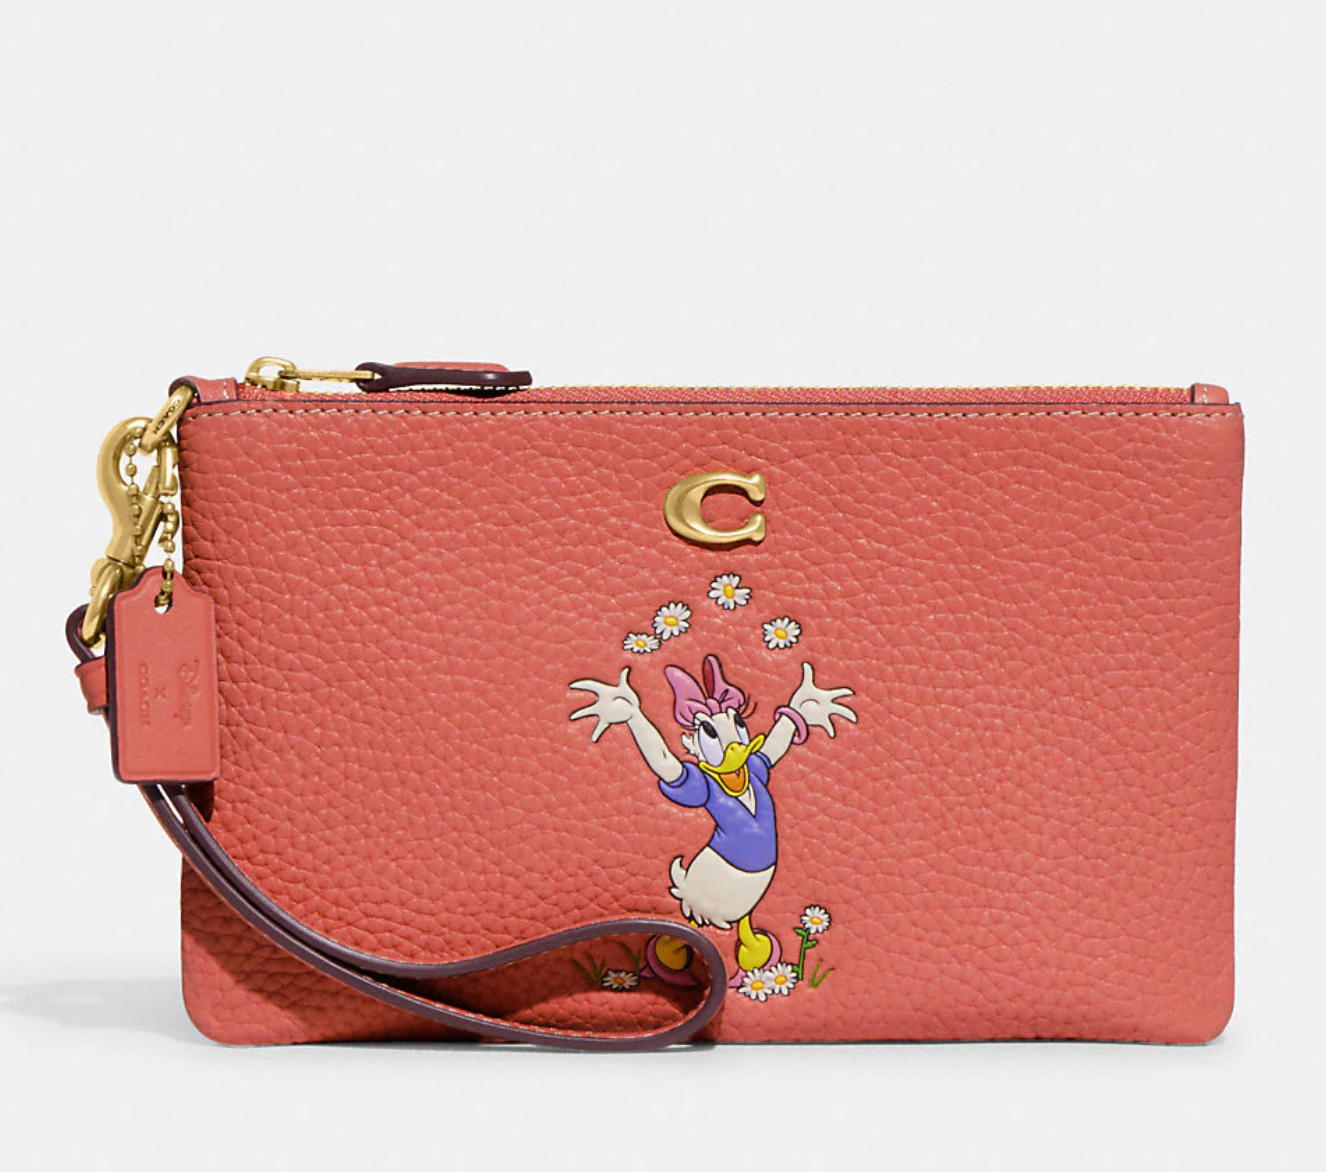 Coach and Disney collaborating again on collection line: See the